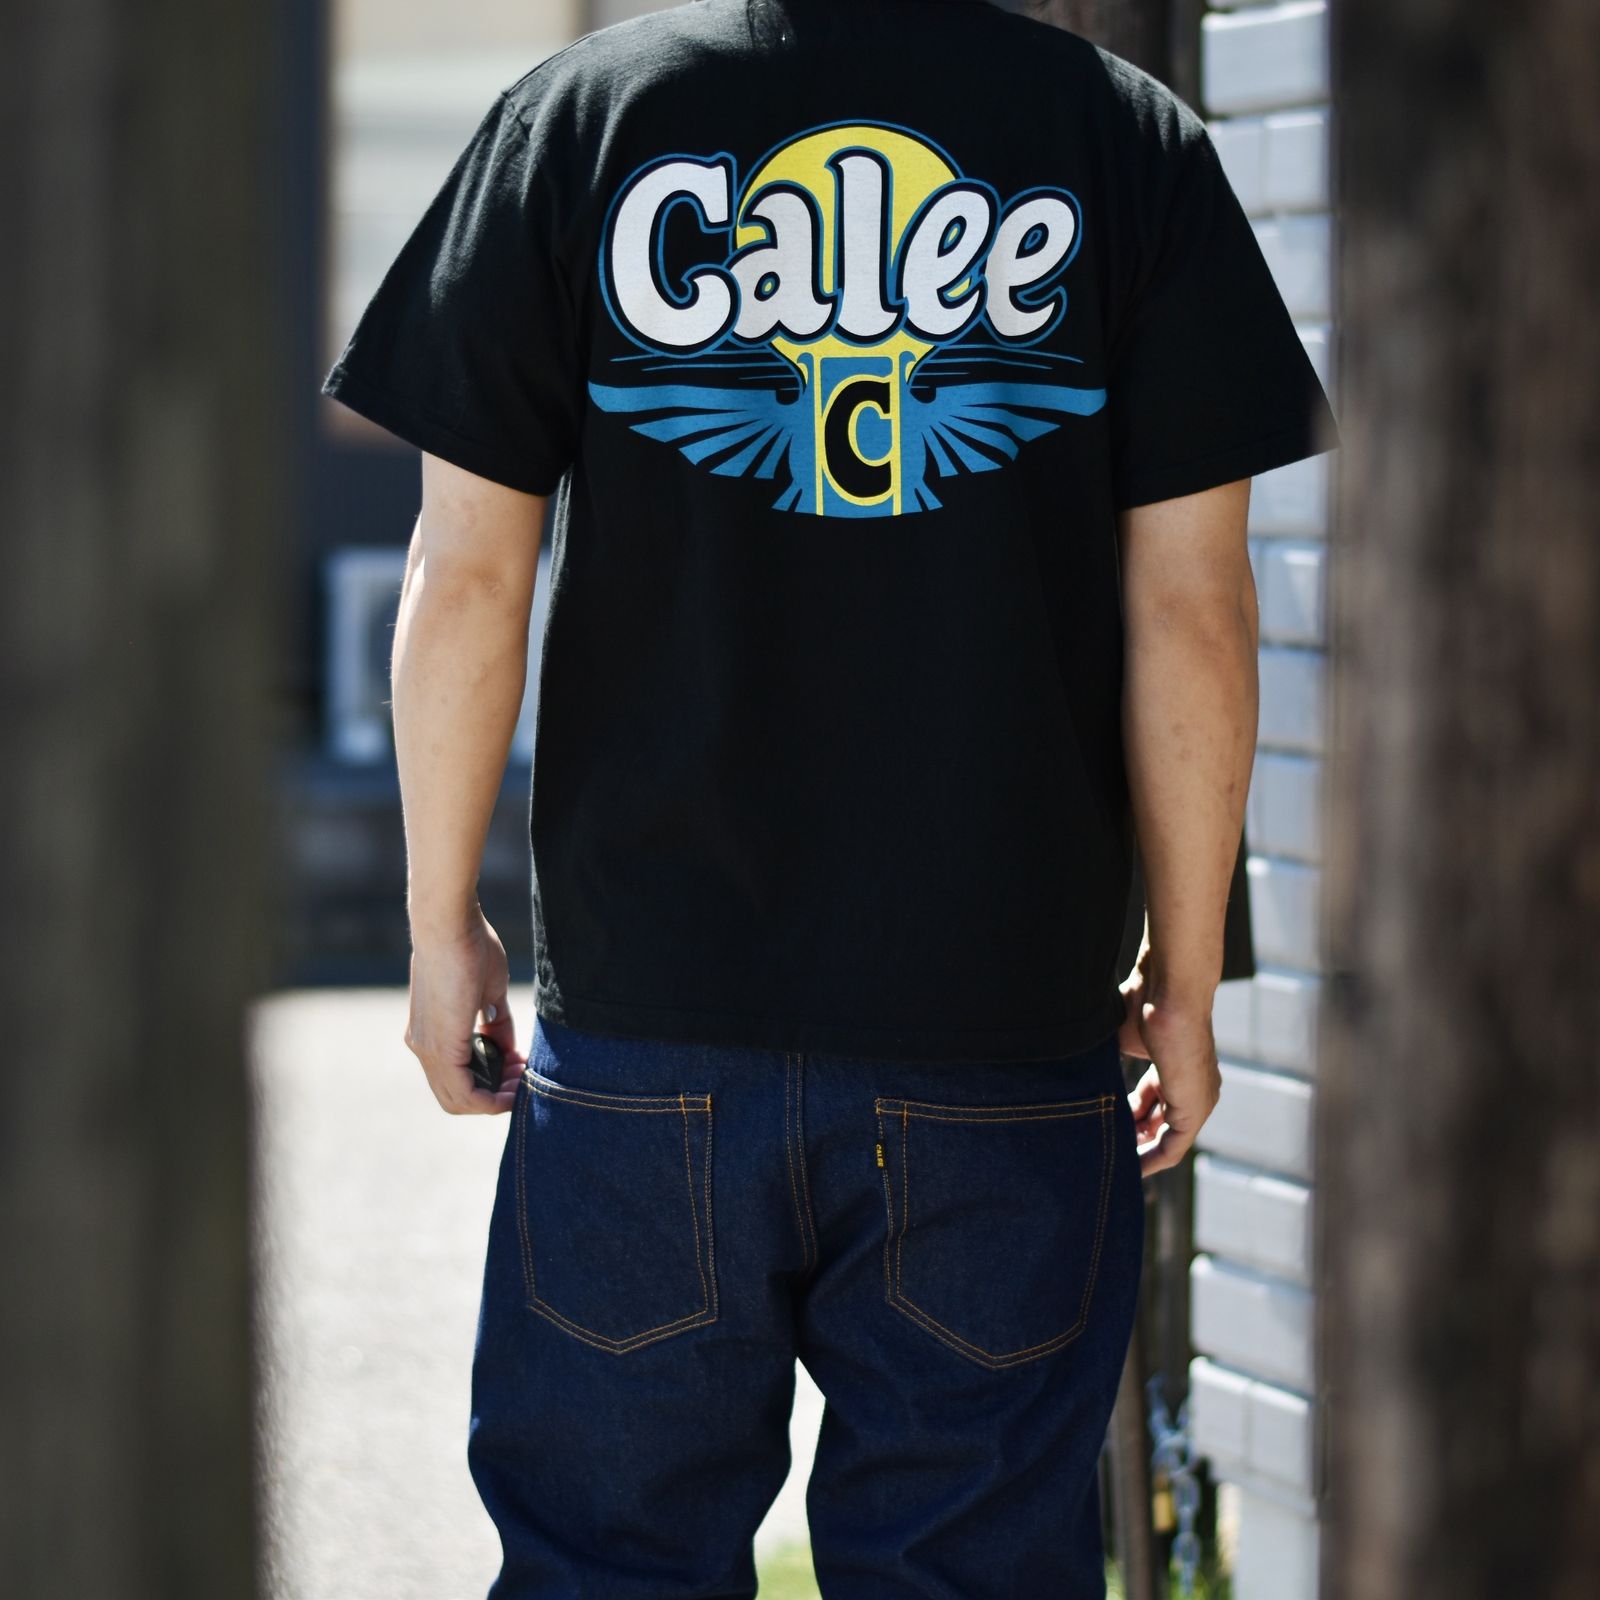 CALEE - キャリー | 22SS | プリントTシャツ | 着用イメージ♪ | chord ...